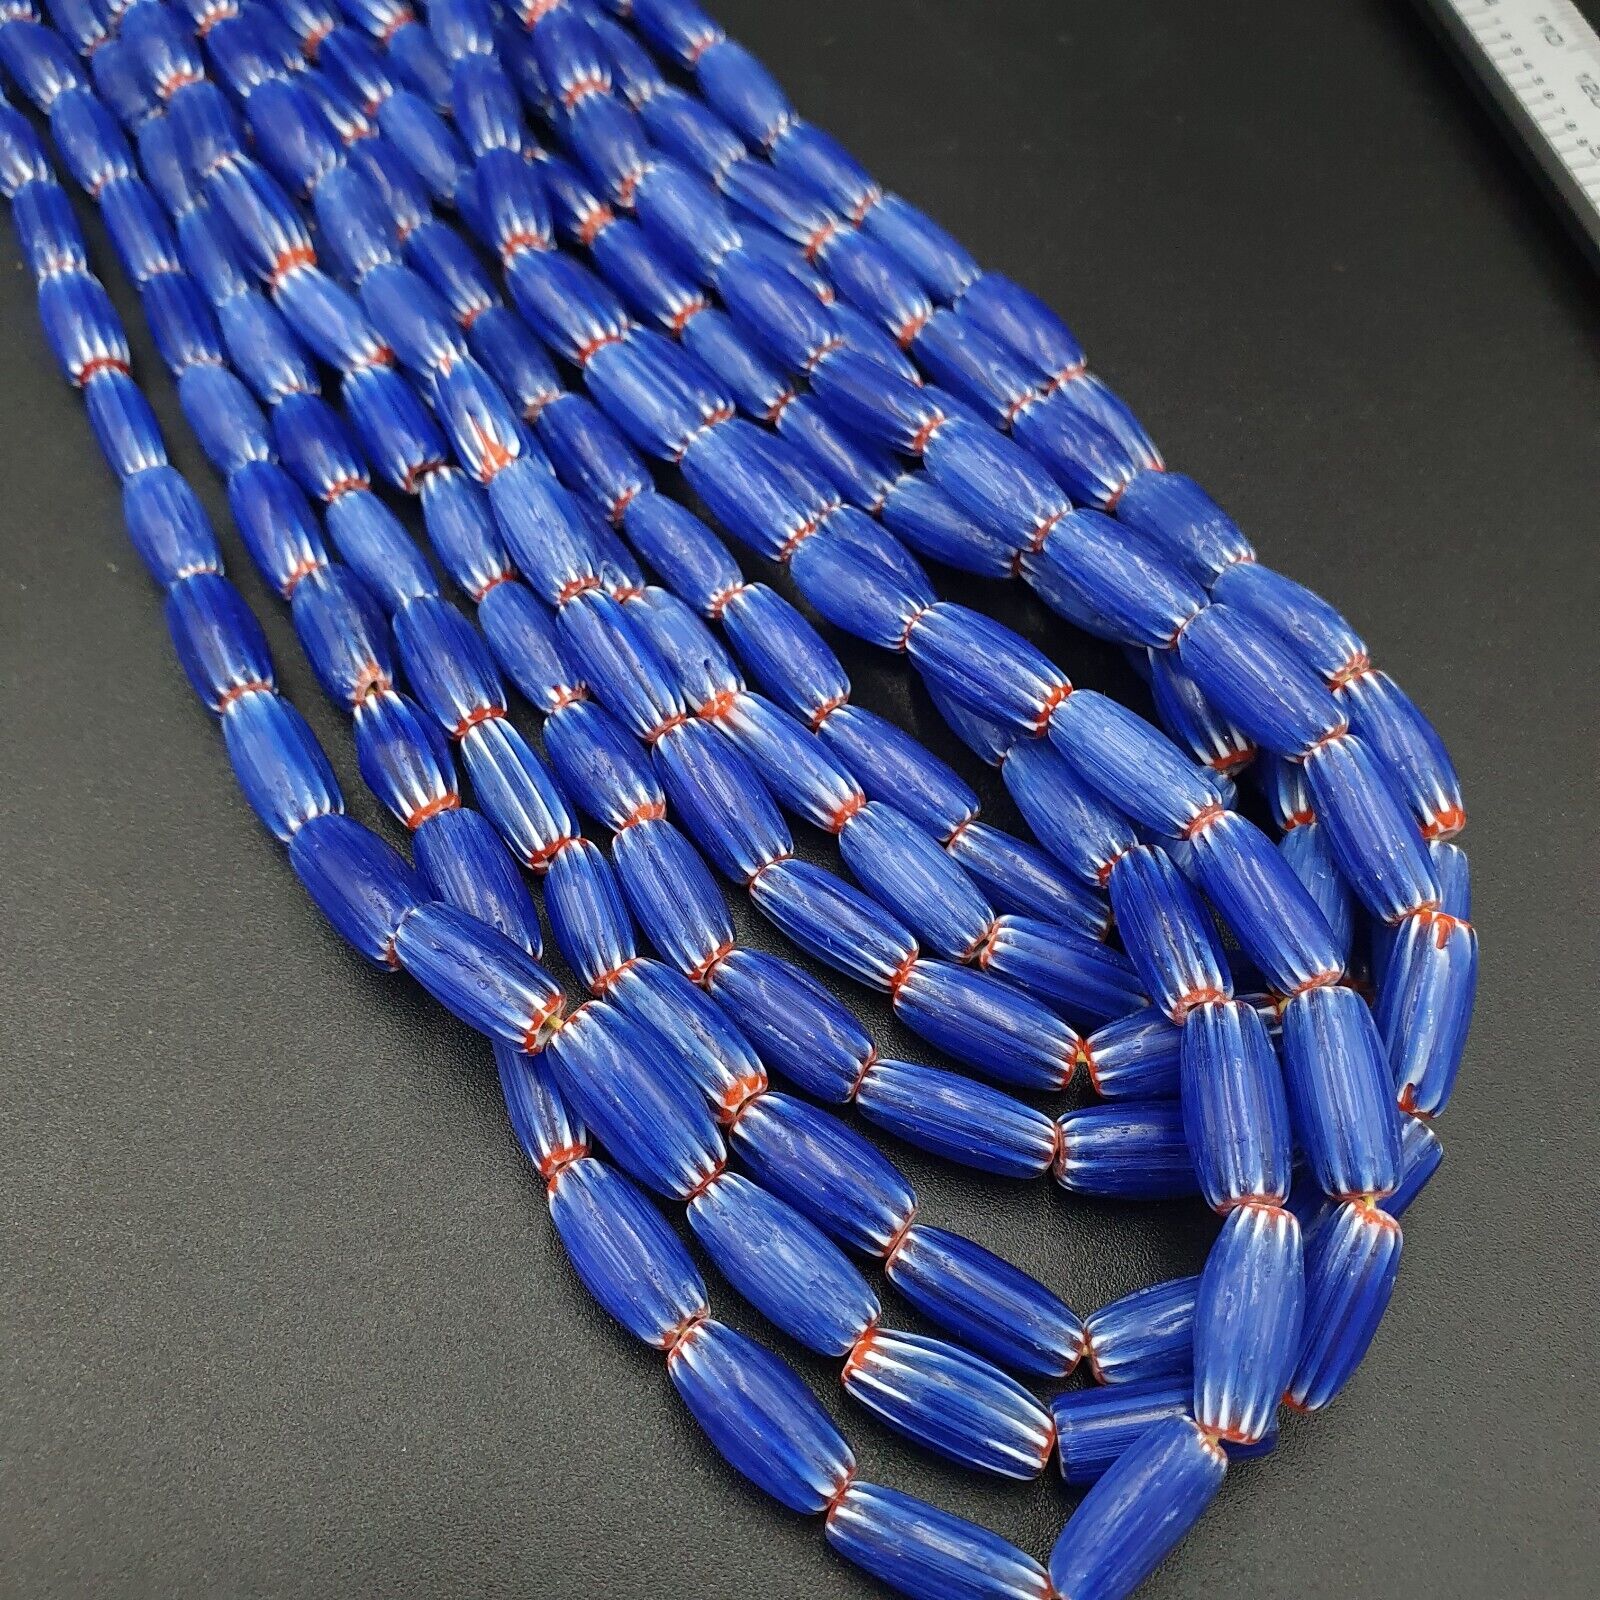 "Image of 3 long strands of vintage blue chevron beads, showcasing a stunning Venetian glasswork technique and African-inspired style, perfect for adding a statement touch to any outfit or jewelry collection."